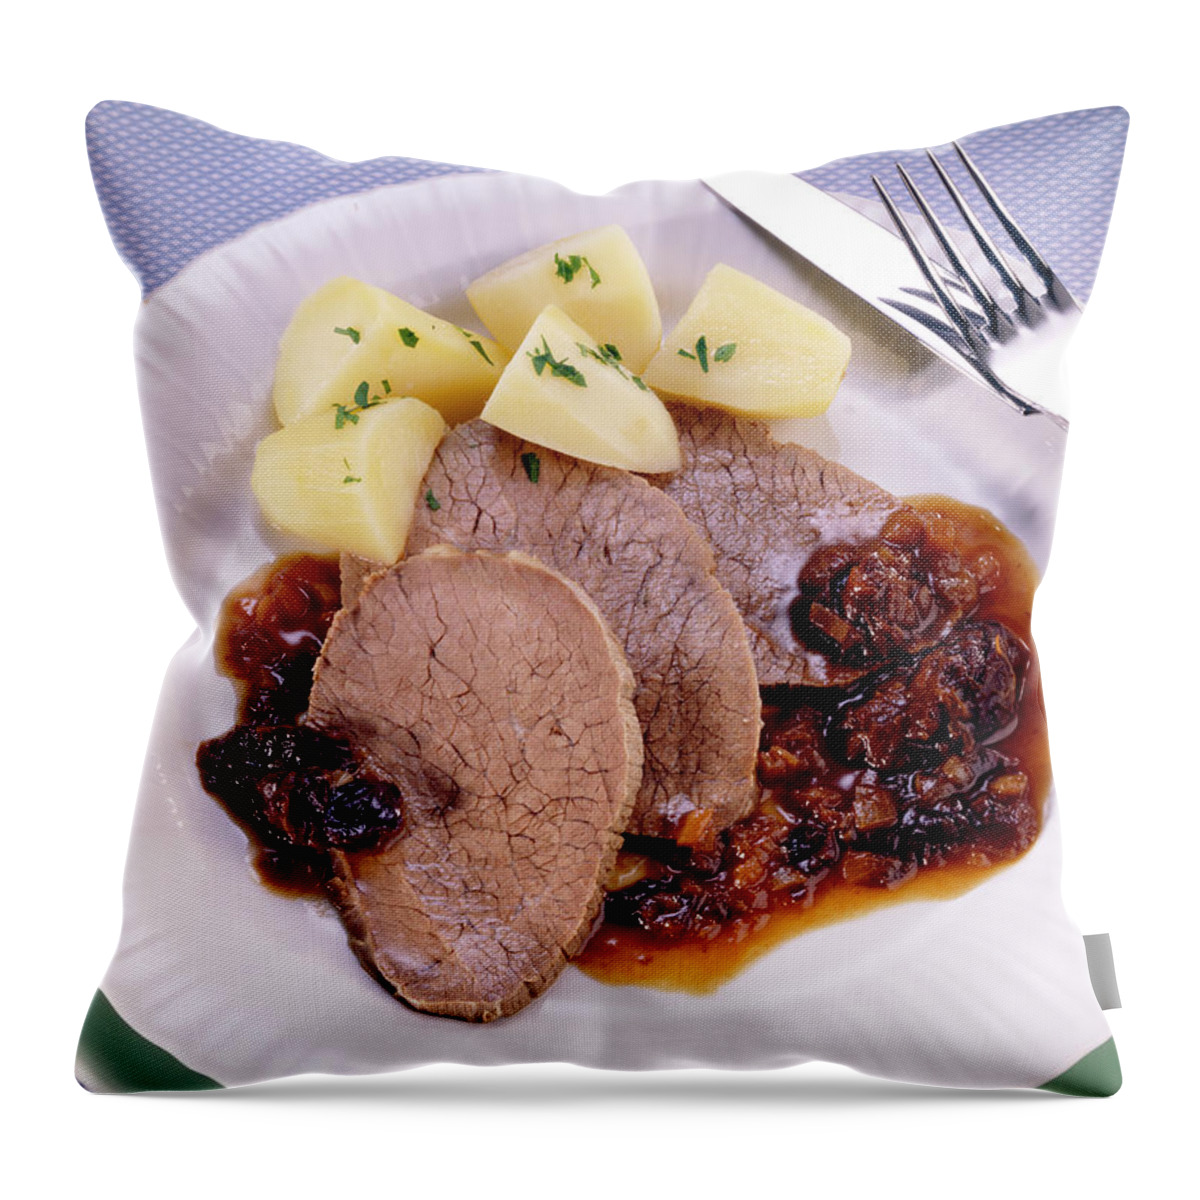 Ip_10171604 Throw Pillow featuring the photograph Beef With Potatoes And Plum Sauce On Plate by Jalag / Uwe Bender